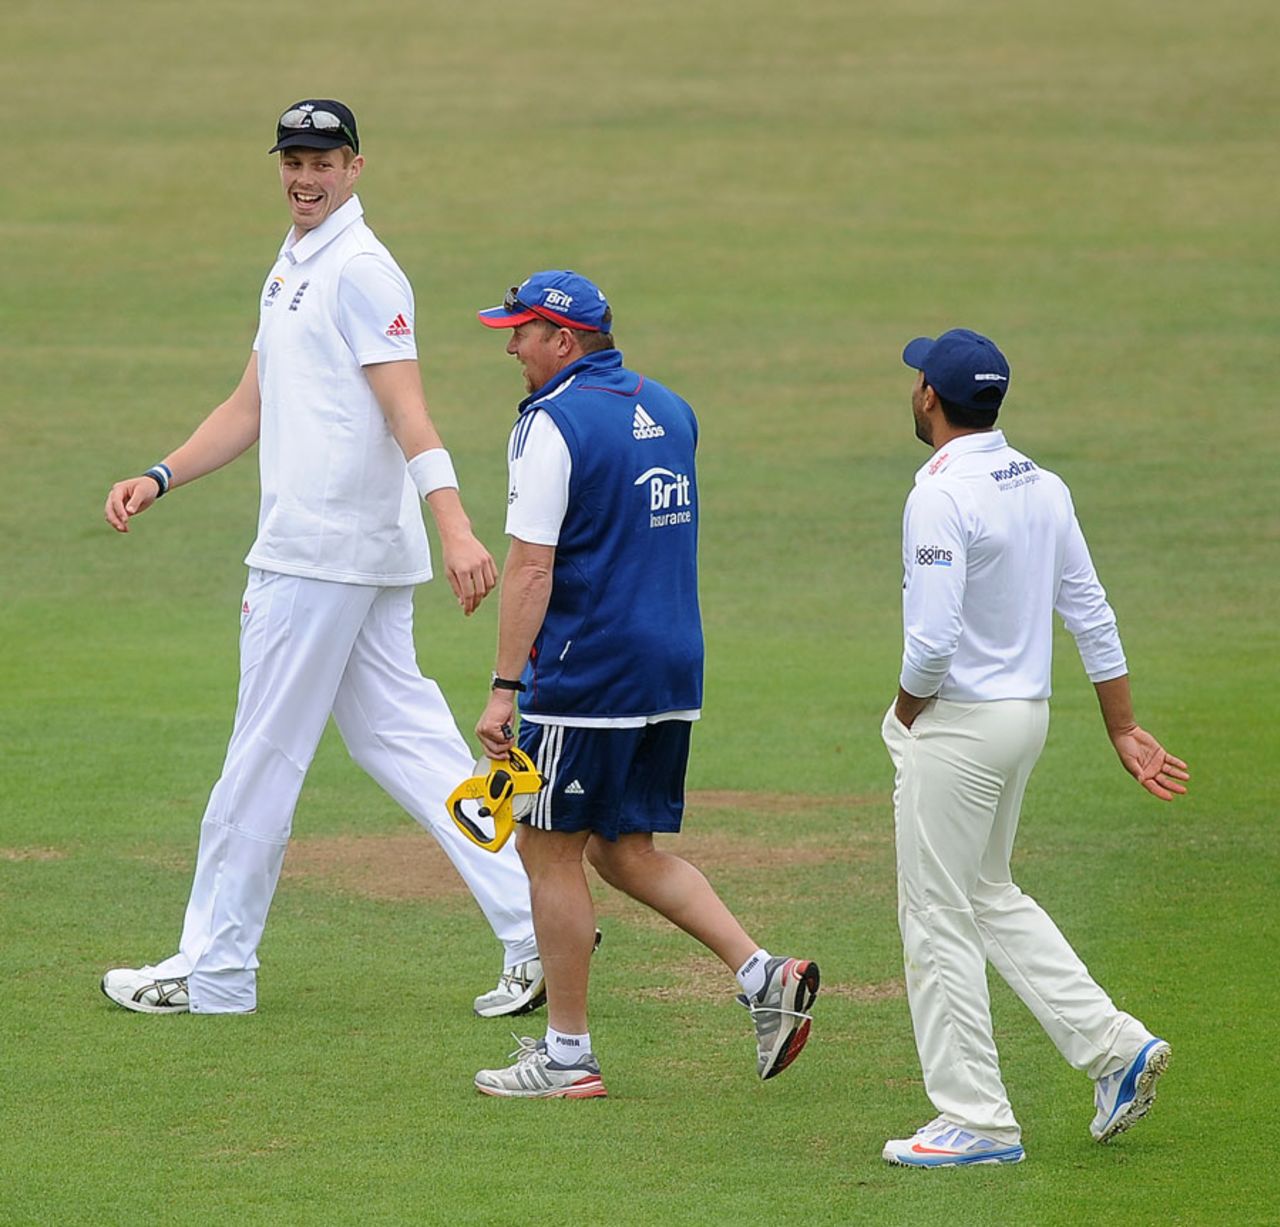 Boyd Rankin was substituted into the Essex side, Essex v England, 3rd day, Chelmsford, July 2, 2013